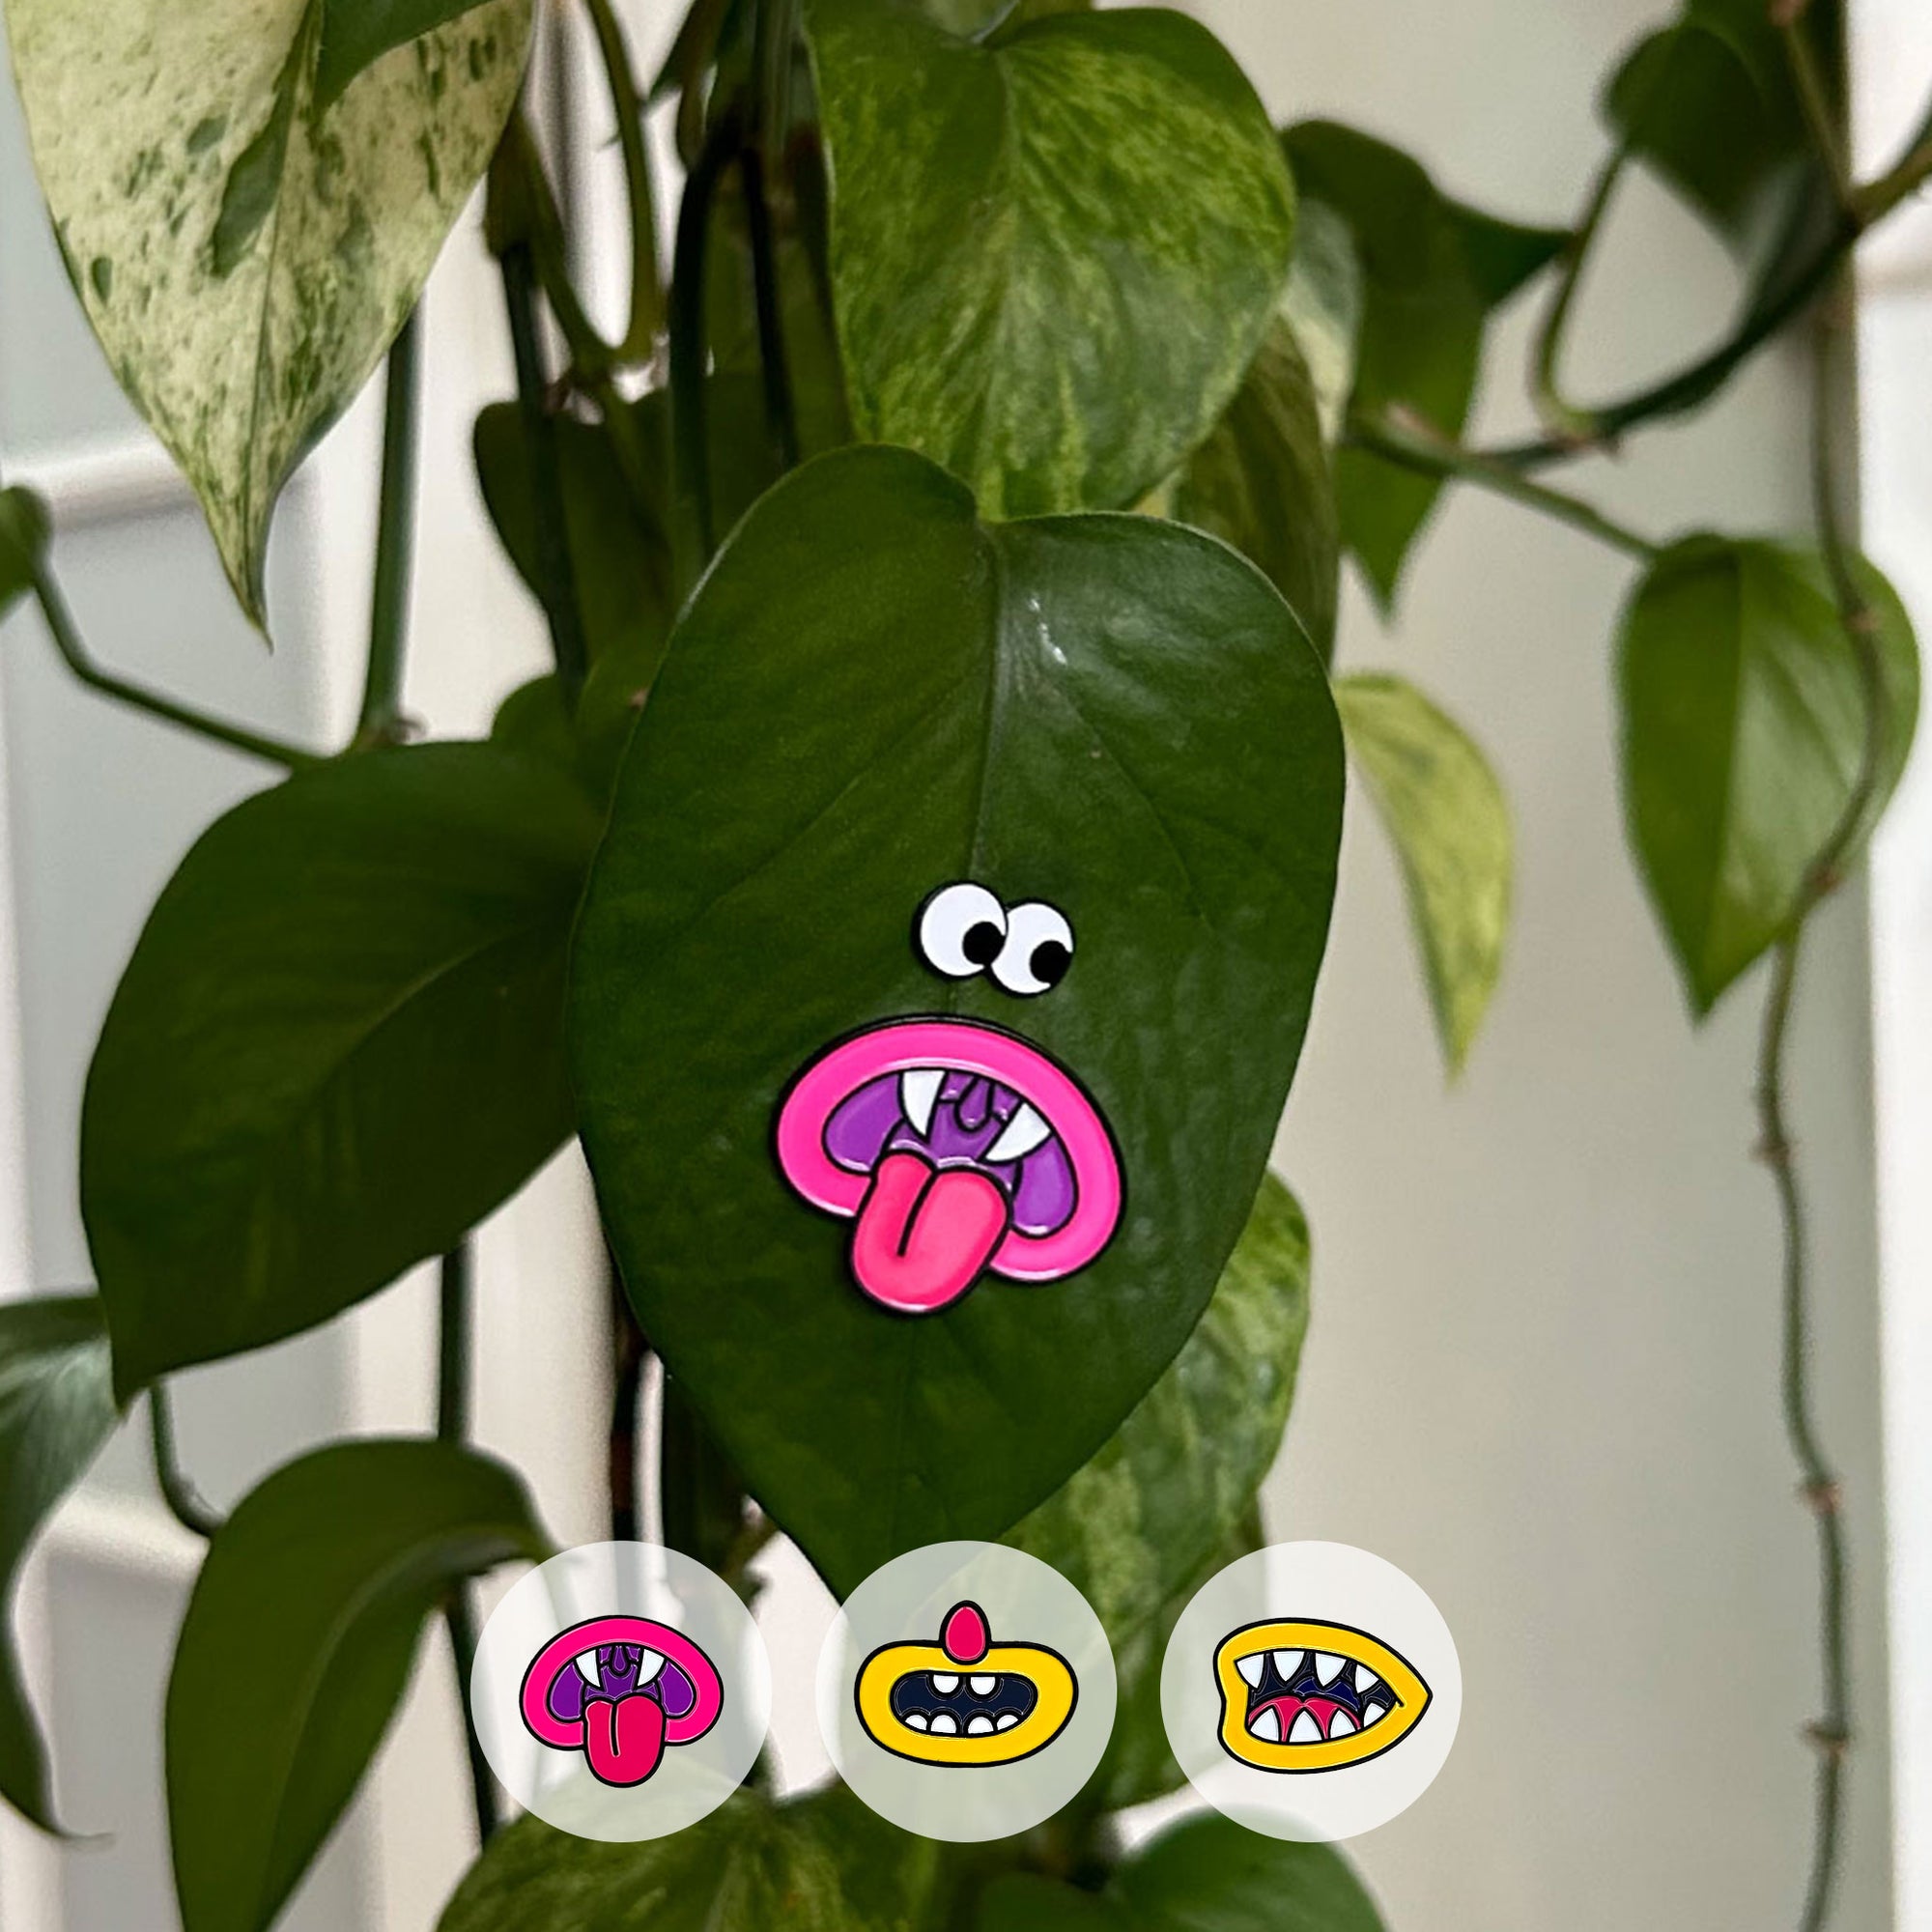  Plants Magnets, 20Pcs Monster Plant Magnets Eyes for Potted  Plants, Funny Plant Pins Charms, Cute Plant Safe Magnets Silicone Decor,  Indoor Outdoor Plant Accessories, Unique Gifts for Plant Lovers (A) 